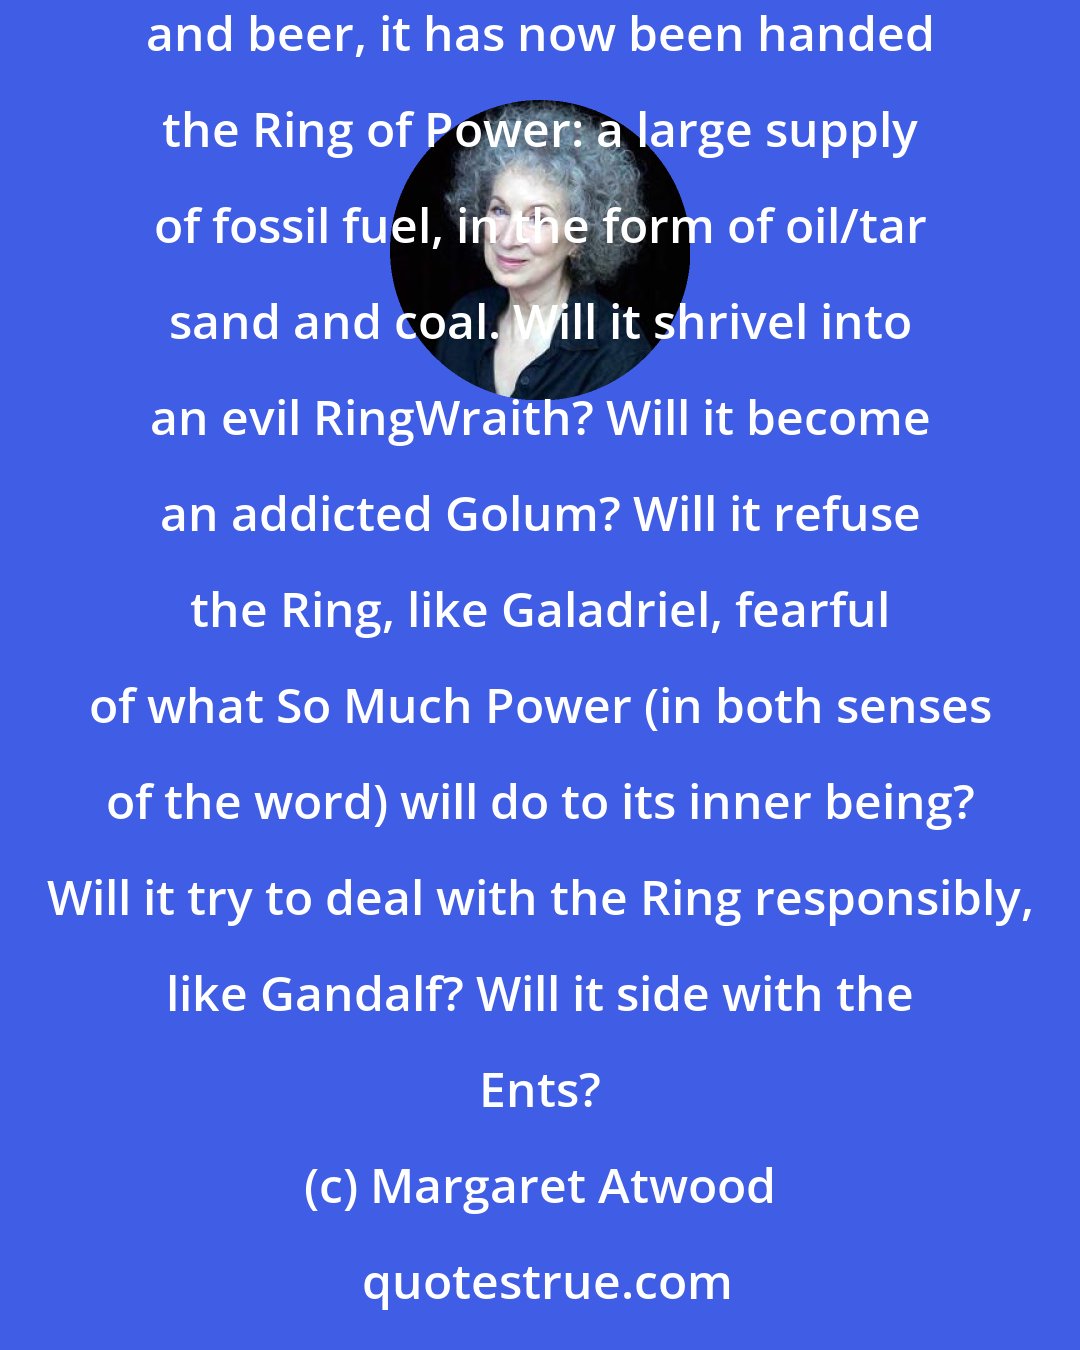 Margaret Atwood: Canada, at the moment, is going through a Lord of the Rings moment. Having been a lowly Hobbit with furry feet and fun parties, with fireworks and beer, it has now been handed the Ring of Power: a large supply of fossil fuel, in the form of oil/tar sand and coal. Will it shrivel into an evil RingWraith? Will it become an addicted Golum? Will it refuse the Ring, like Galadriel, fearful of what So Much Power (in both senses of the word) will do to its inner being? Will it try to deal with the Ring responsibly, like Gandalf? Will it side with the Ents?